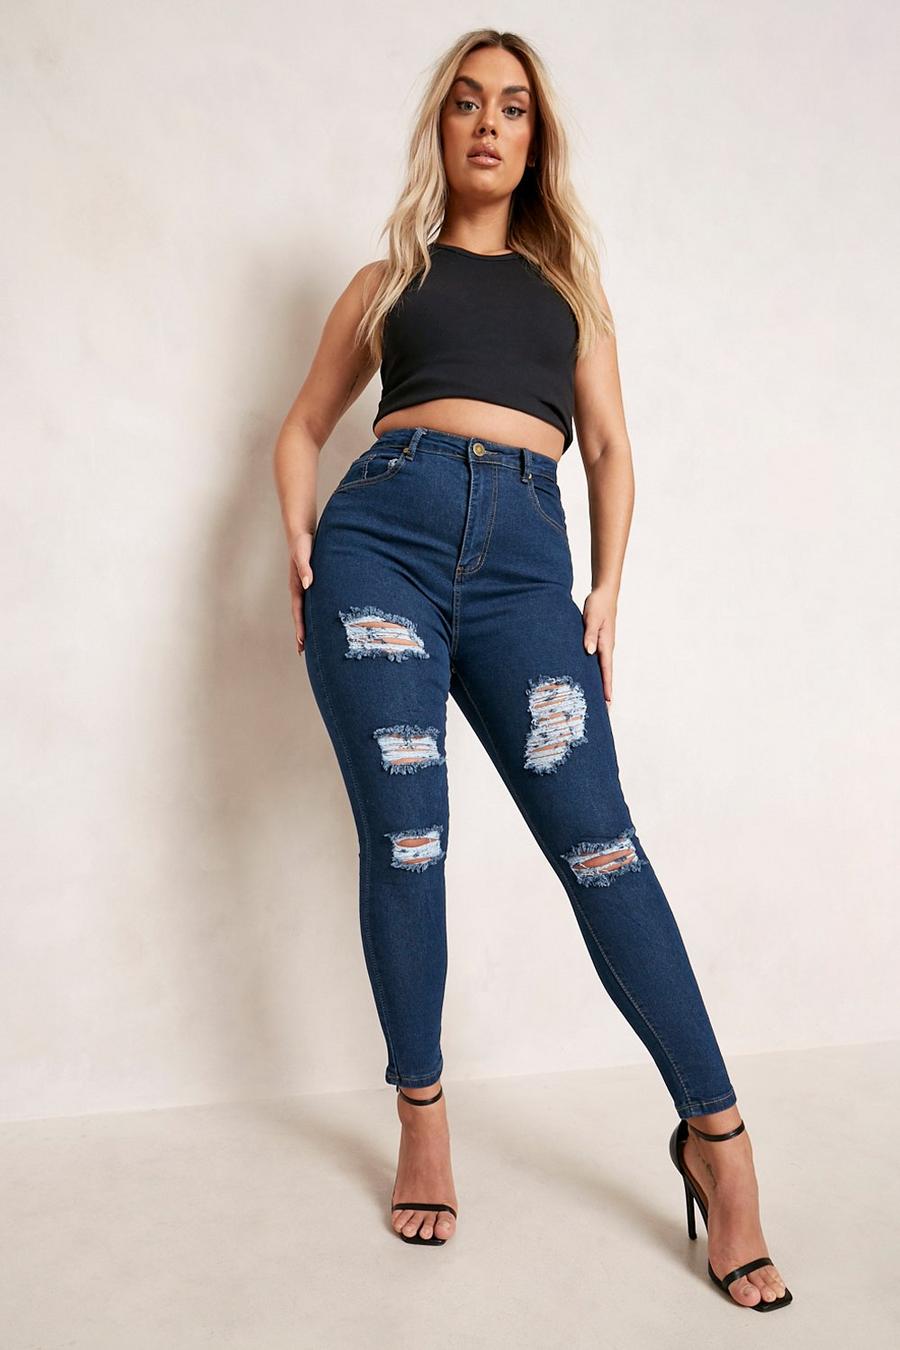 Women's Plus Size Clothing - Buy Skinny Jeans, T-shirts & More